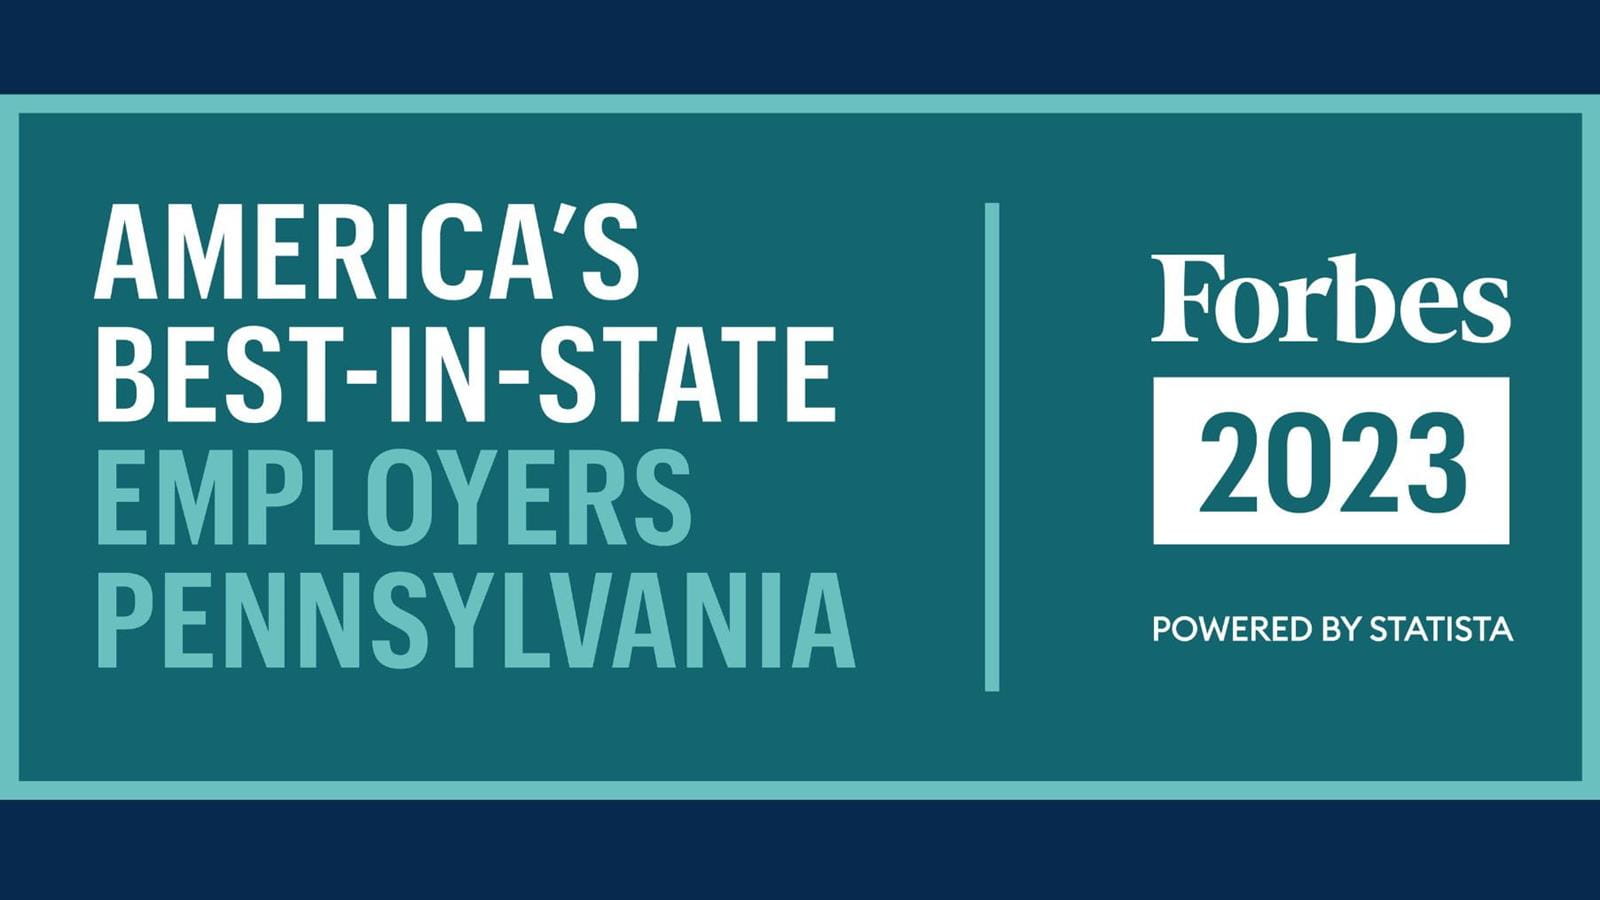 America Best in State Employers Pennsylvania. Forbes 2023. Powered by Statista.